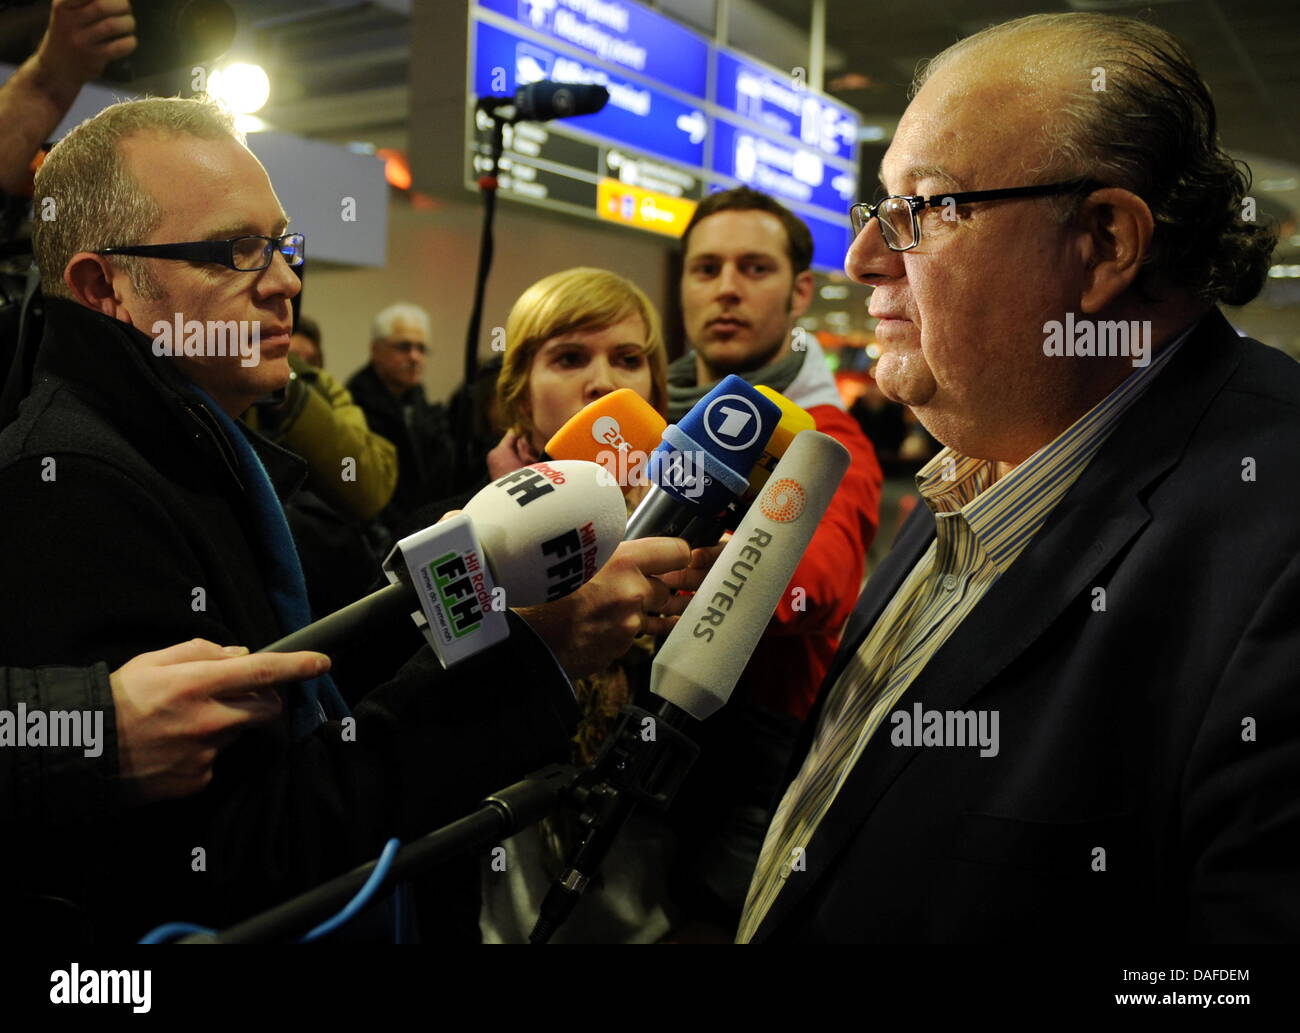 Attorney Peter Stompfe (R) from Marburg talks to journalists on his arrival from Tripoli, Libya, at the airport in Frankfurt, Germany, 21 February 2011. Stompfe has been frequently travelling to Libya for the past 16 years. Due to the escalating violence in Libya, German nationals were prompted to leave the country. A Lufthansa airplane landed this evening in Frankfurt from Tripoli Stock Photo